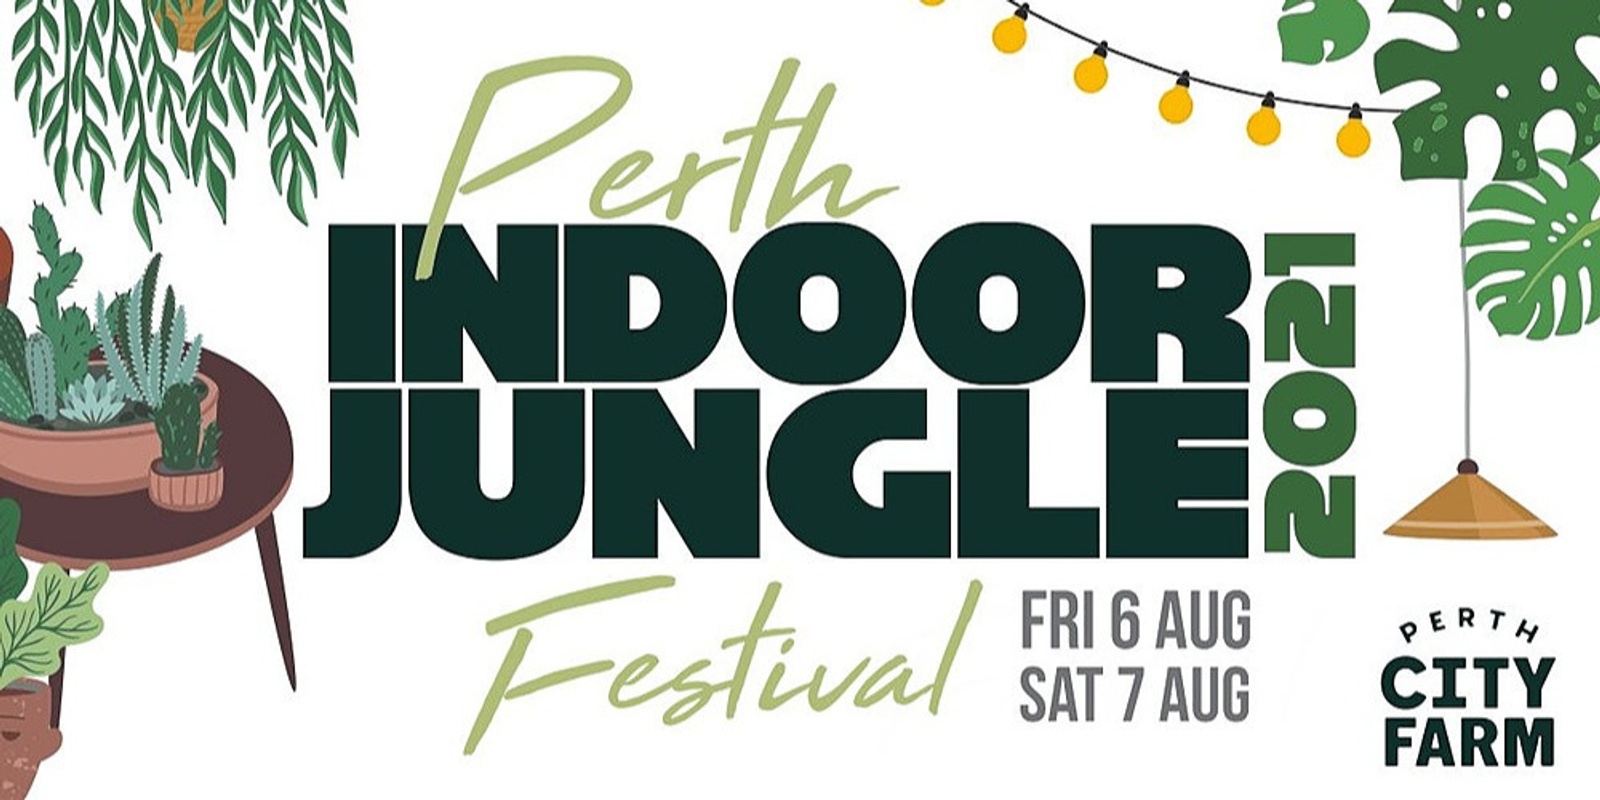 Banner image for Perth Indoor Jungle Festival 2021